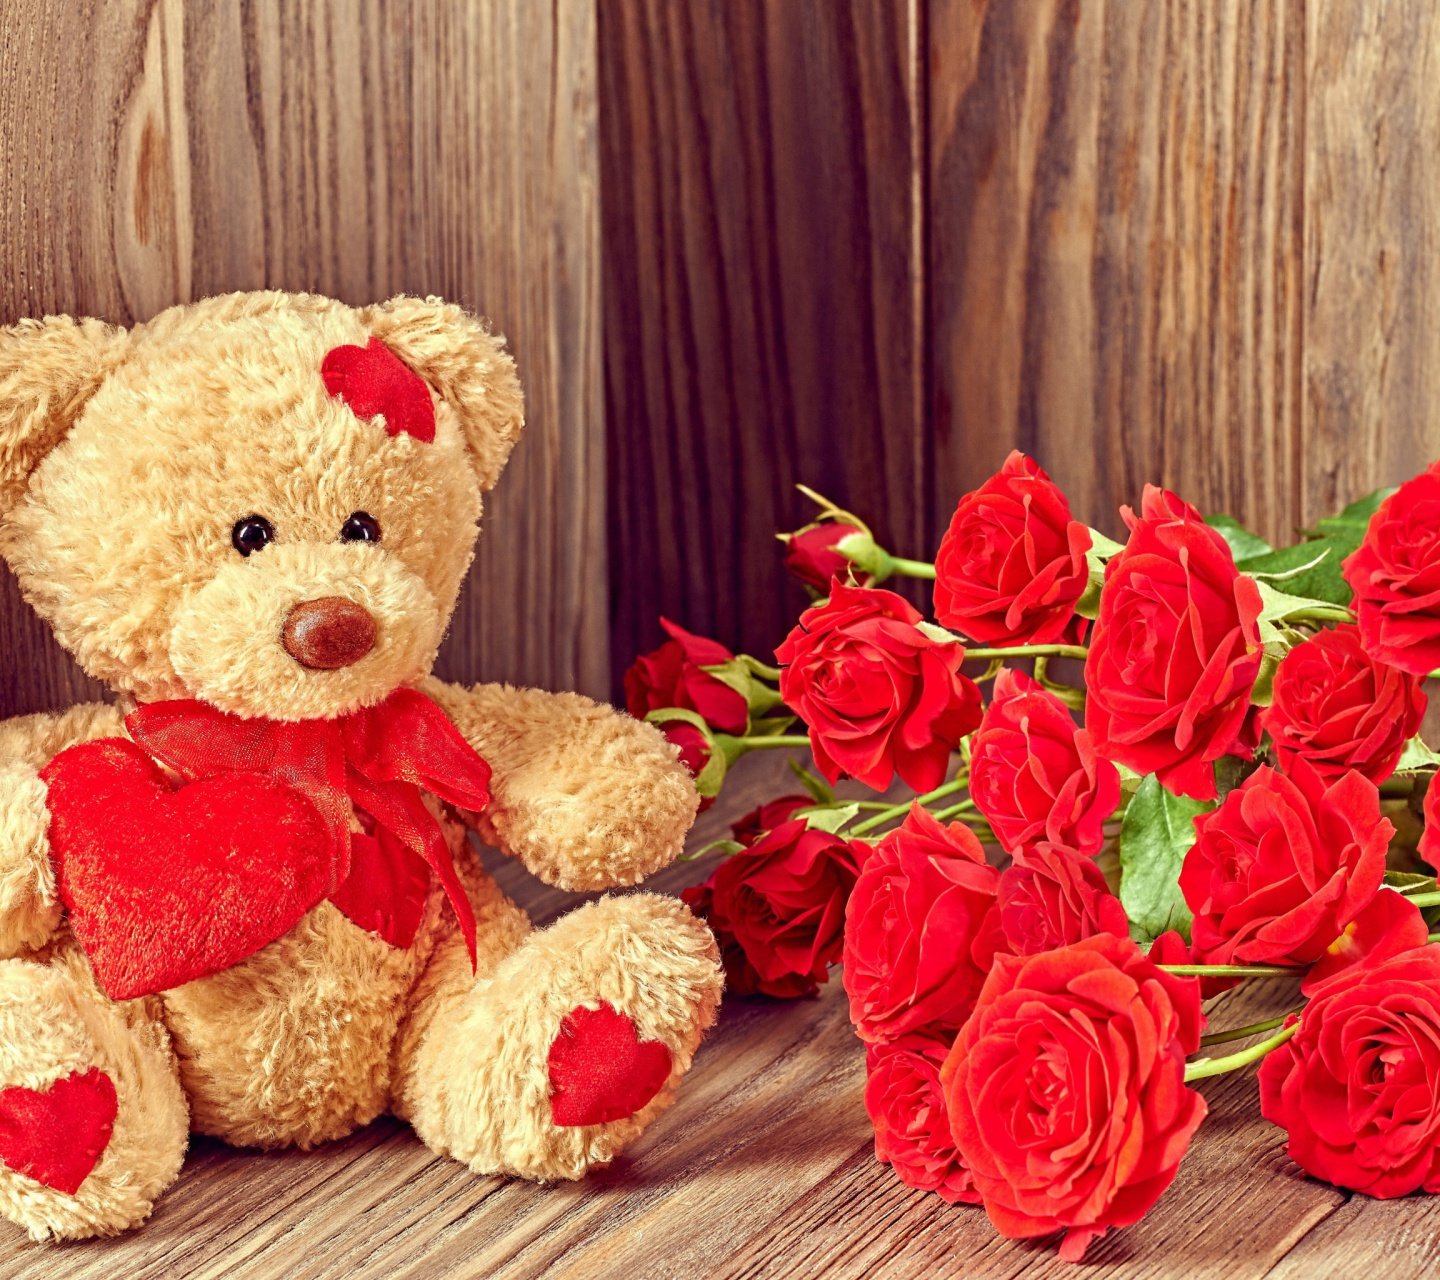 Brodwn Teddy Bear Gift for Saint Valentines Day wallpaper 1440x1280